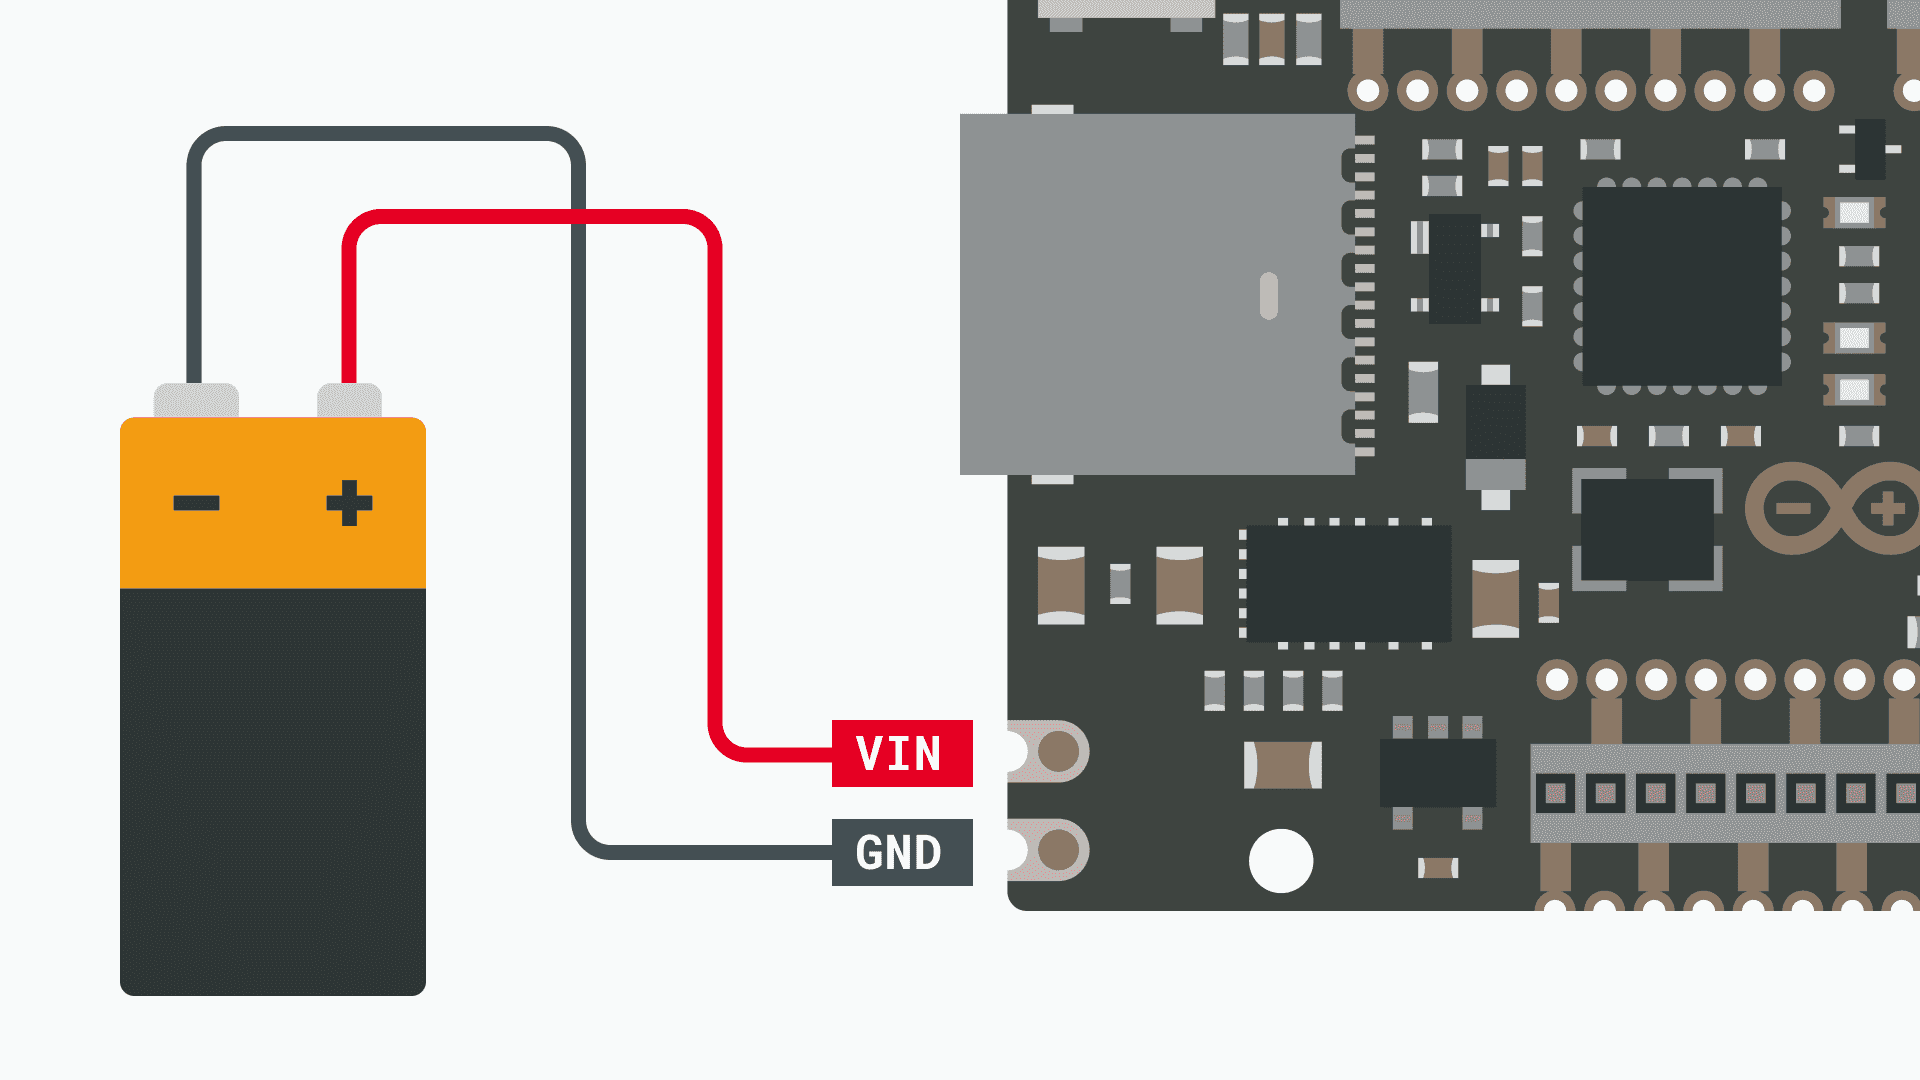 A Guide to the Arduino UNO Mini Limited Edition